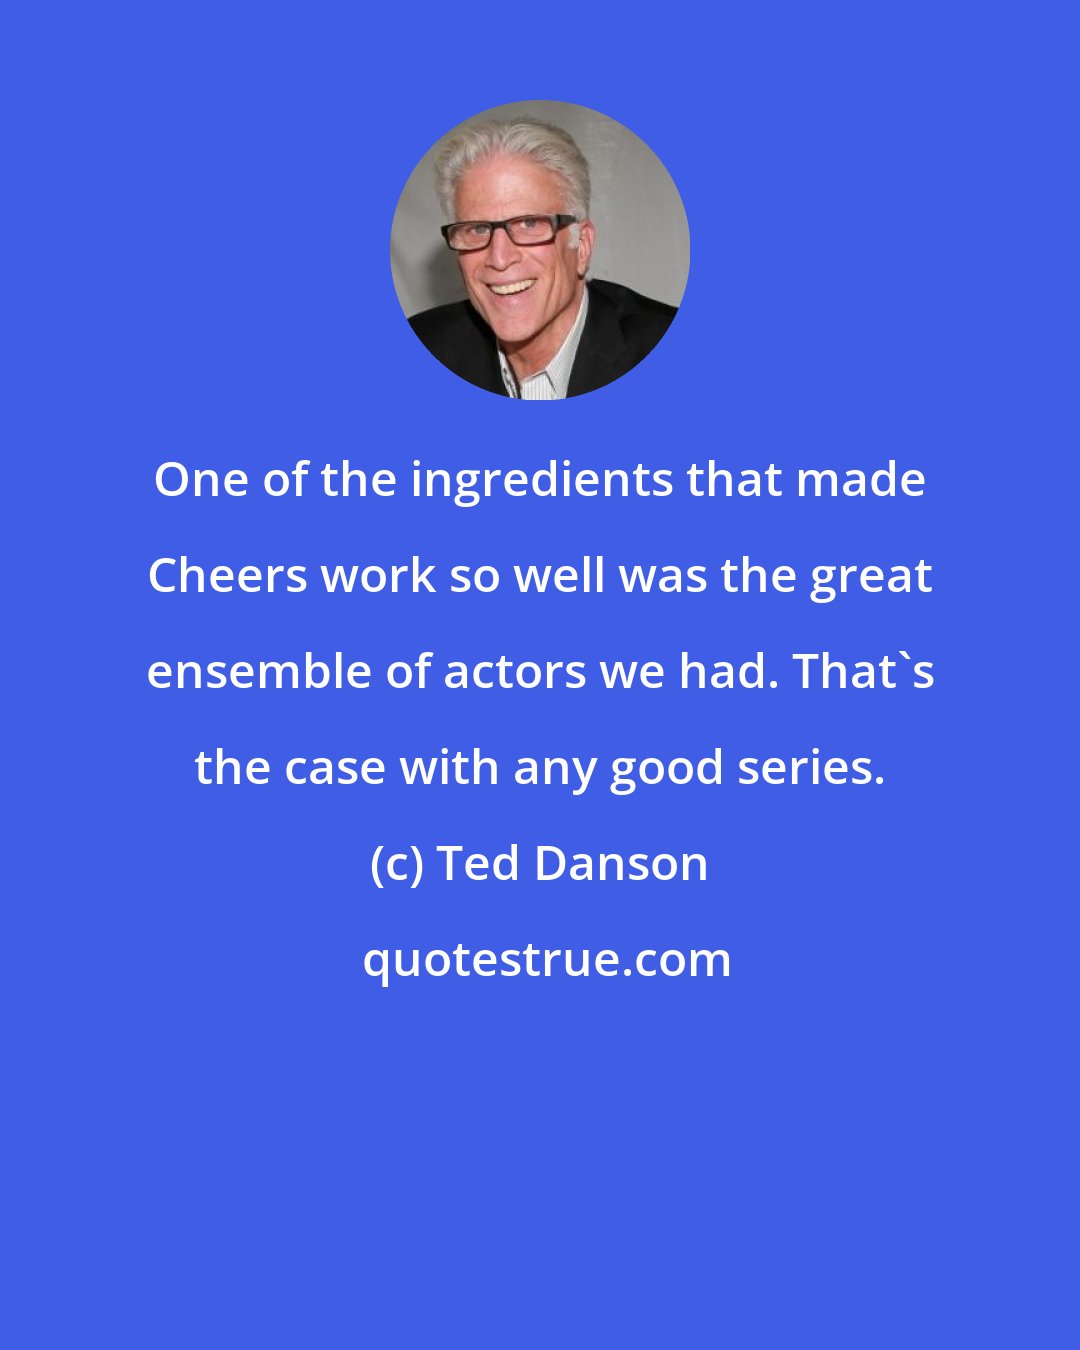 Ted Danson: One of the ingredients that made Cheers work so well was the great ensemble of actors we had. That's the case with any good series.